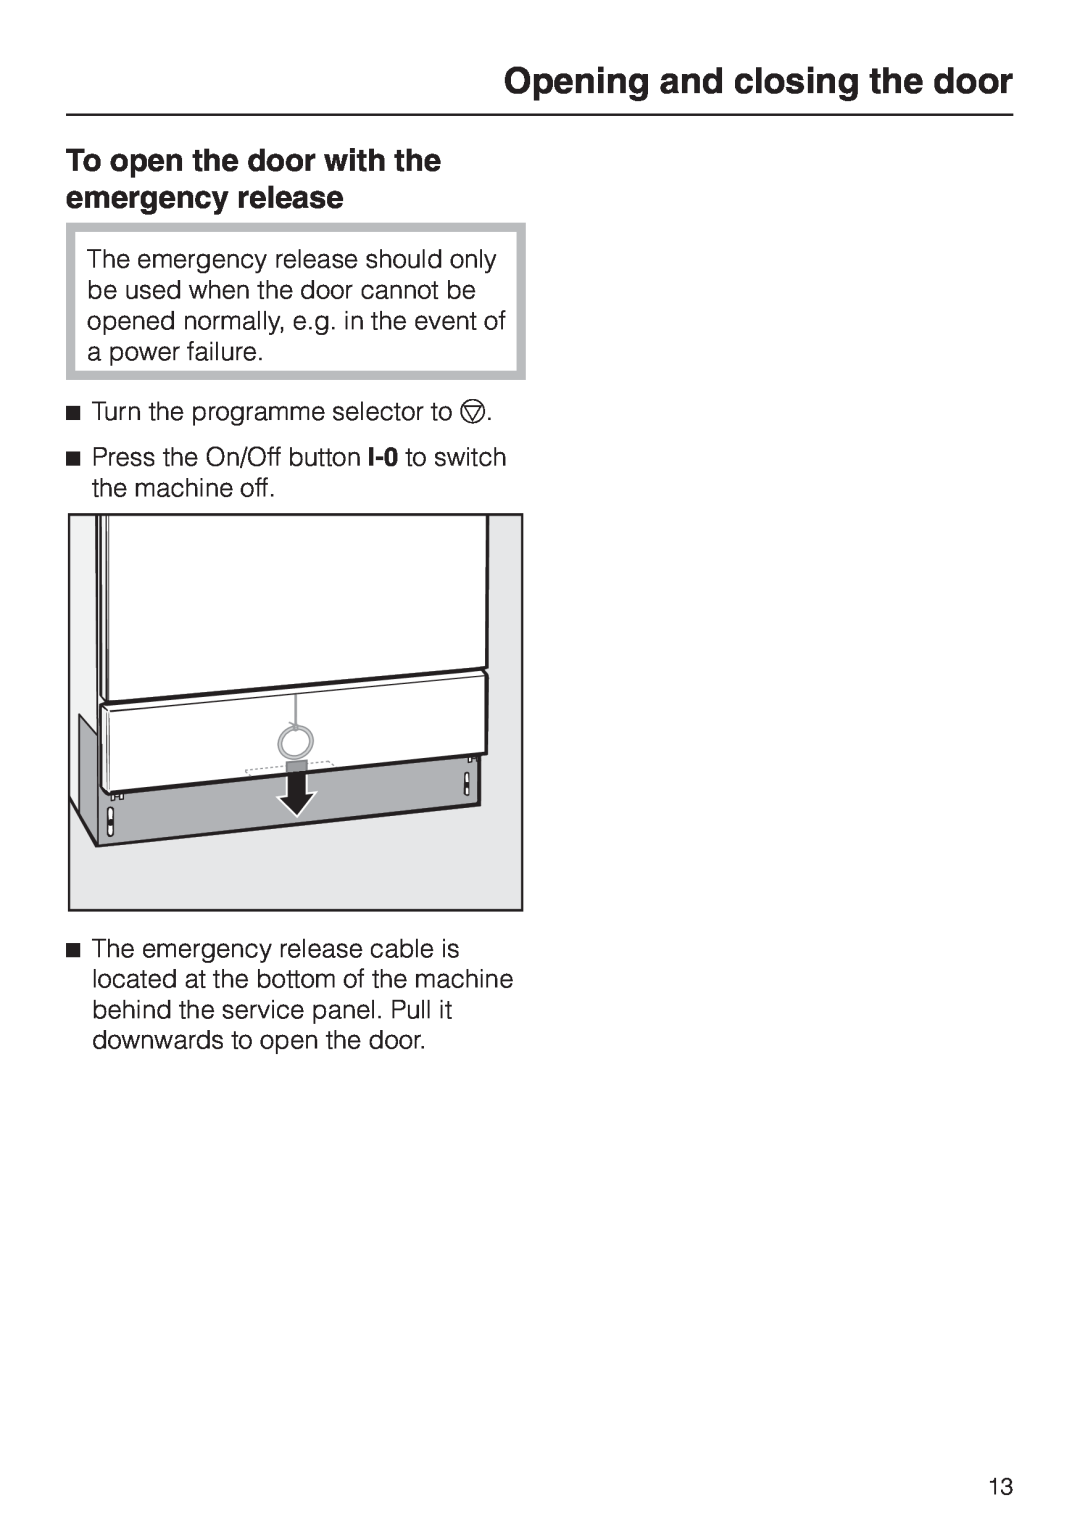 Miele G 7860 operating instructions To open the door with the emergency release, Opening and closing the door 